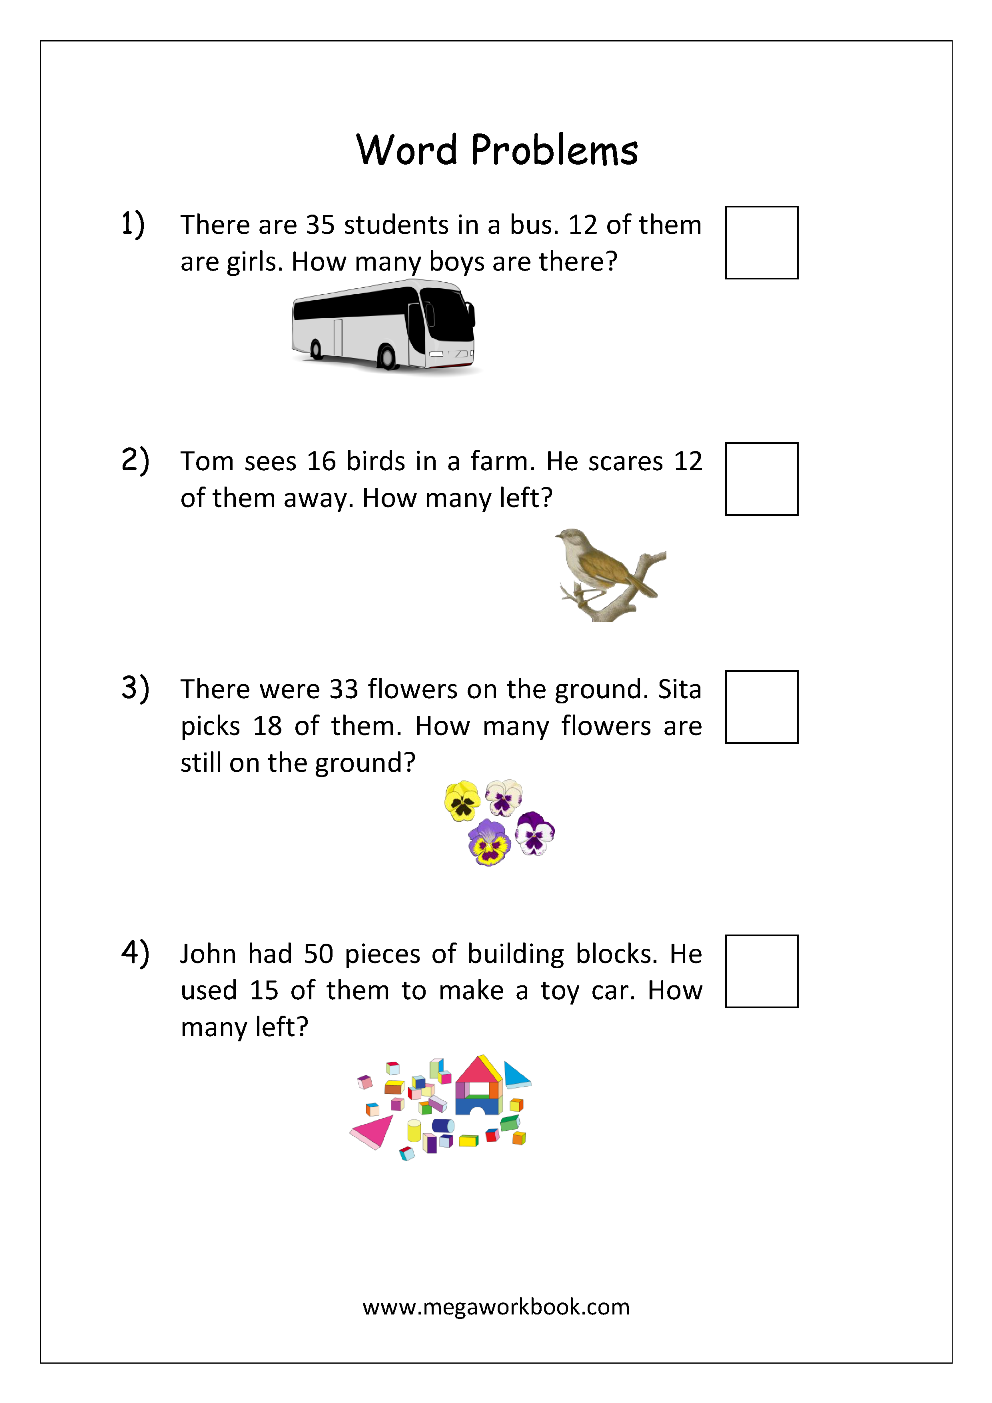 grade-1-word-problems-subtraction-winter-subtraction-word-problems-numbers-1-10-for